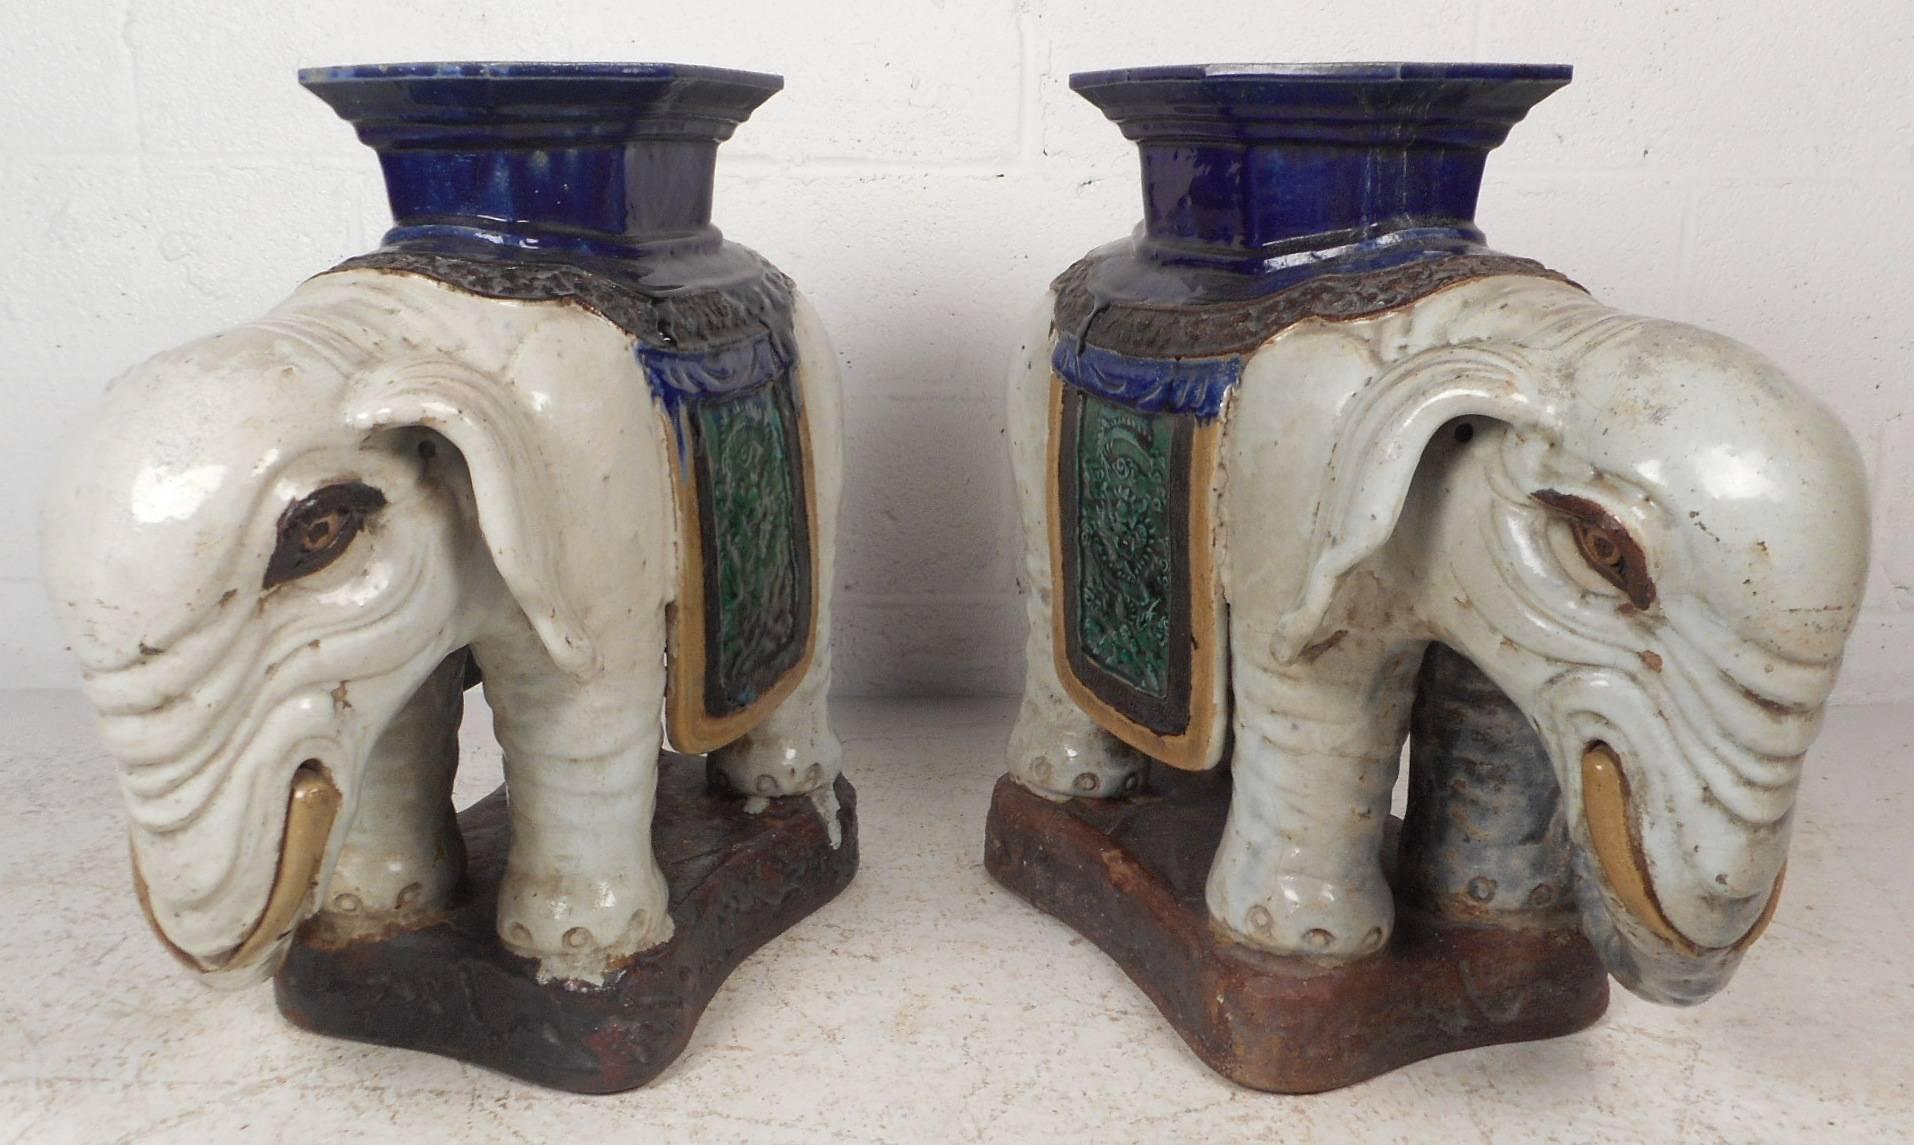 This beautiful Mid-Century Modern pair of elephant tables feature incredible detail throughout with various elaborate colors and designs. These functional and unique pieces of art can serve as plant stands, end tables, or simply decorative.